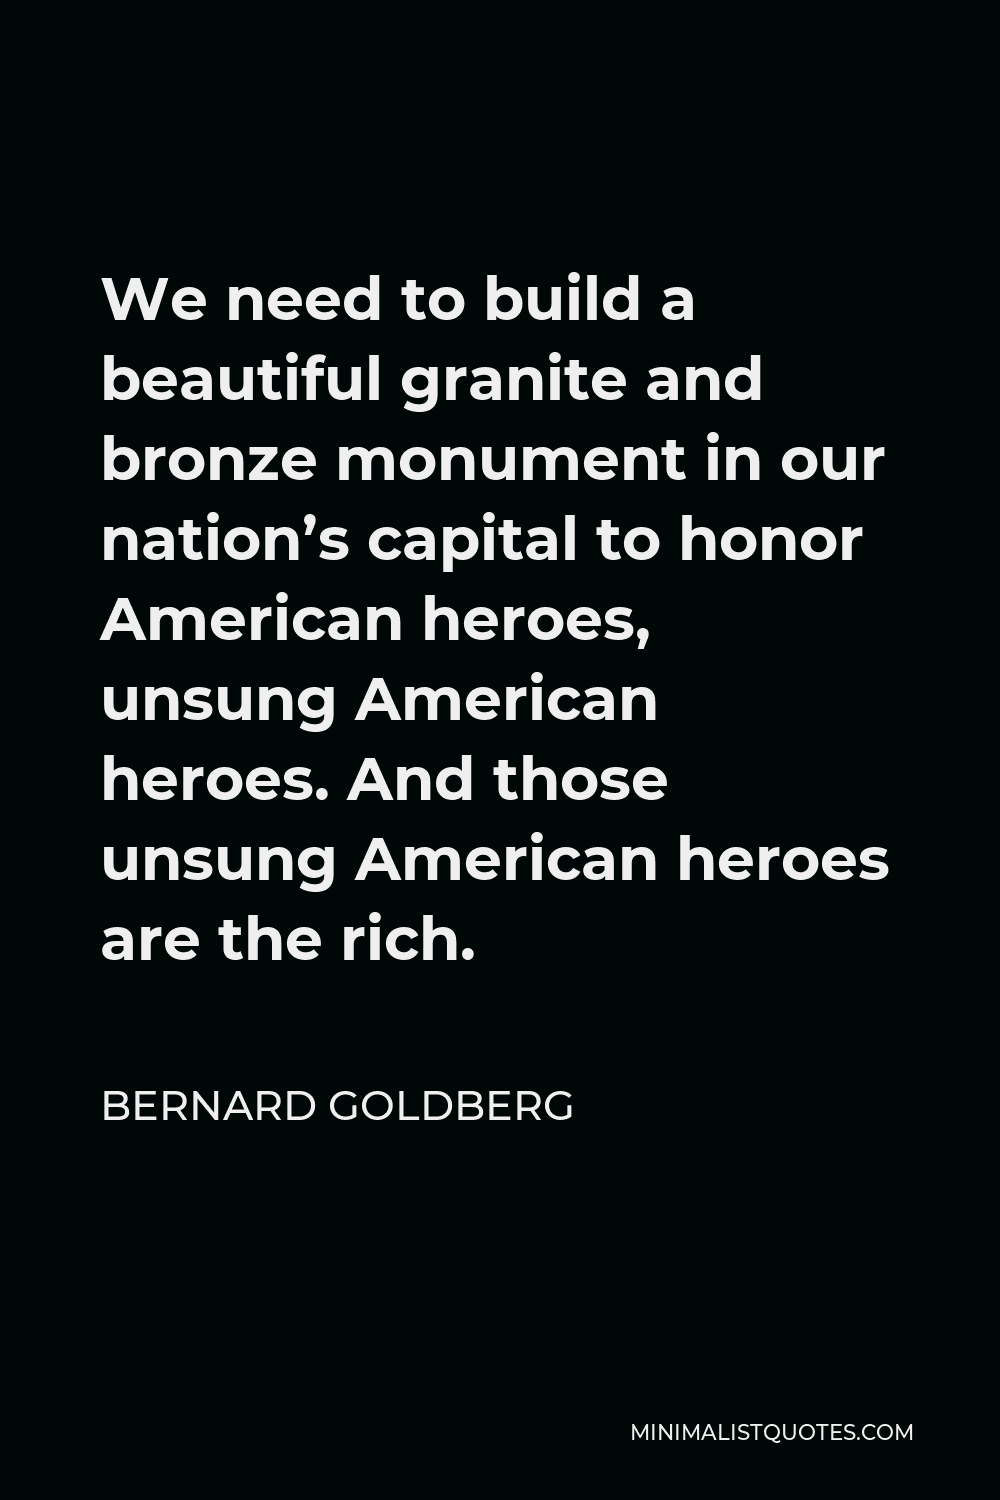 Bernard Goldberg Quote - We need to build a beautiful granite and bronze monument in our nation’s capital to honor American heroes, unsung American heroes. And those unsung American heroes are the rich.